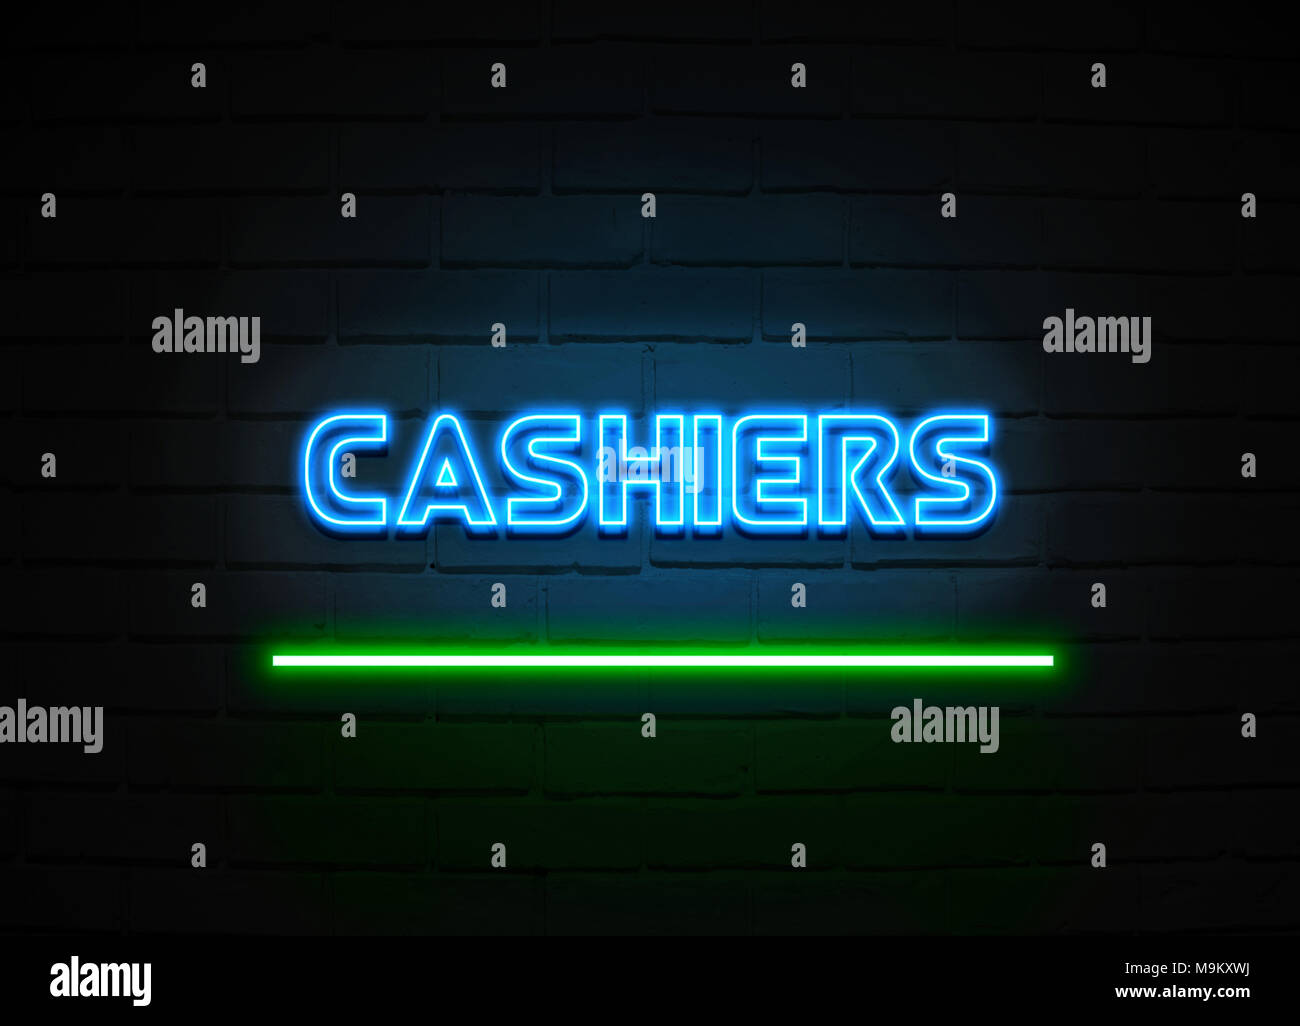 Cashiers neon sign - Glowing Neon Sign on brickwall wall - 3D rendered royalty free stock illustration. Stock Photo